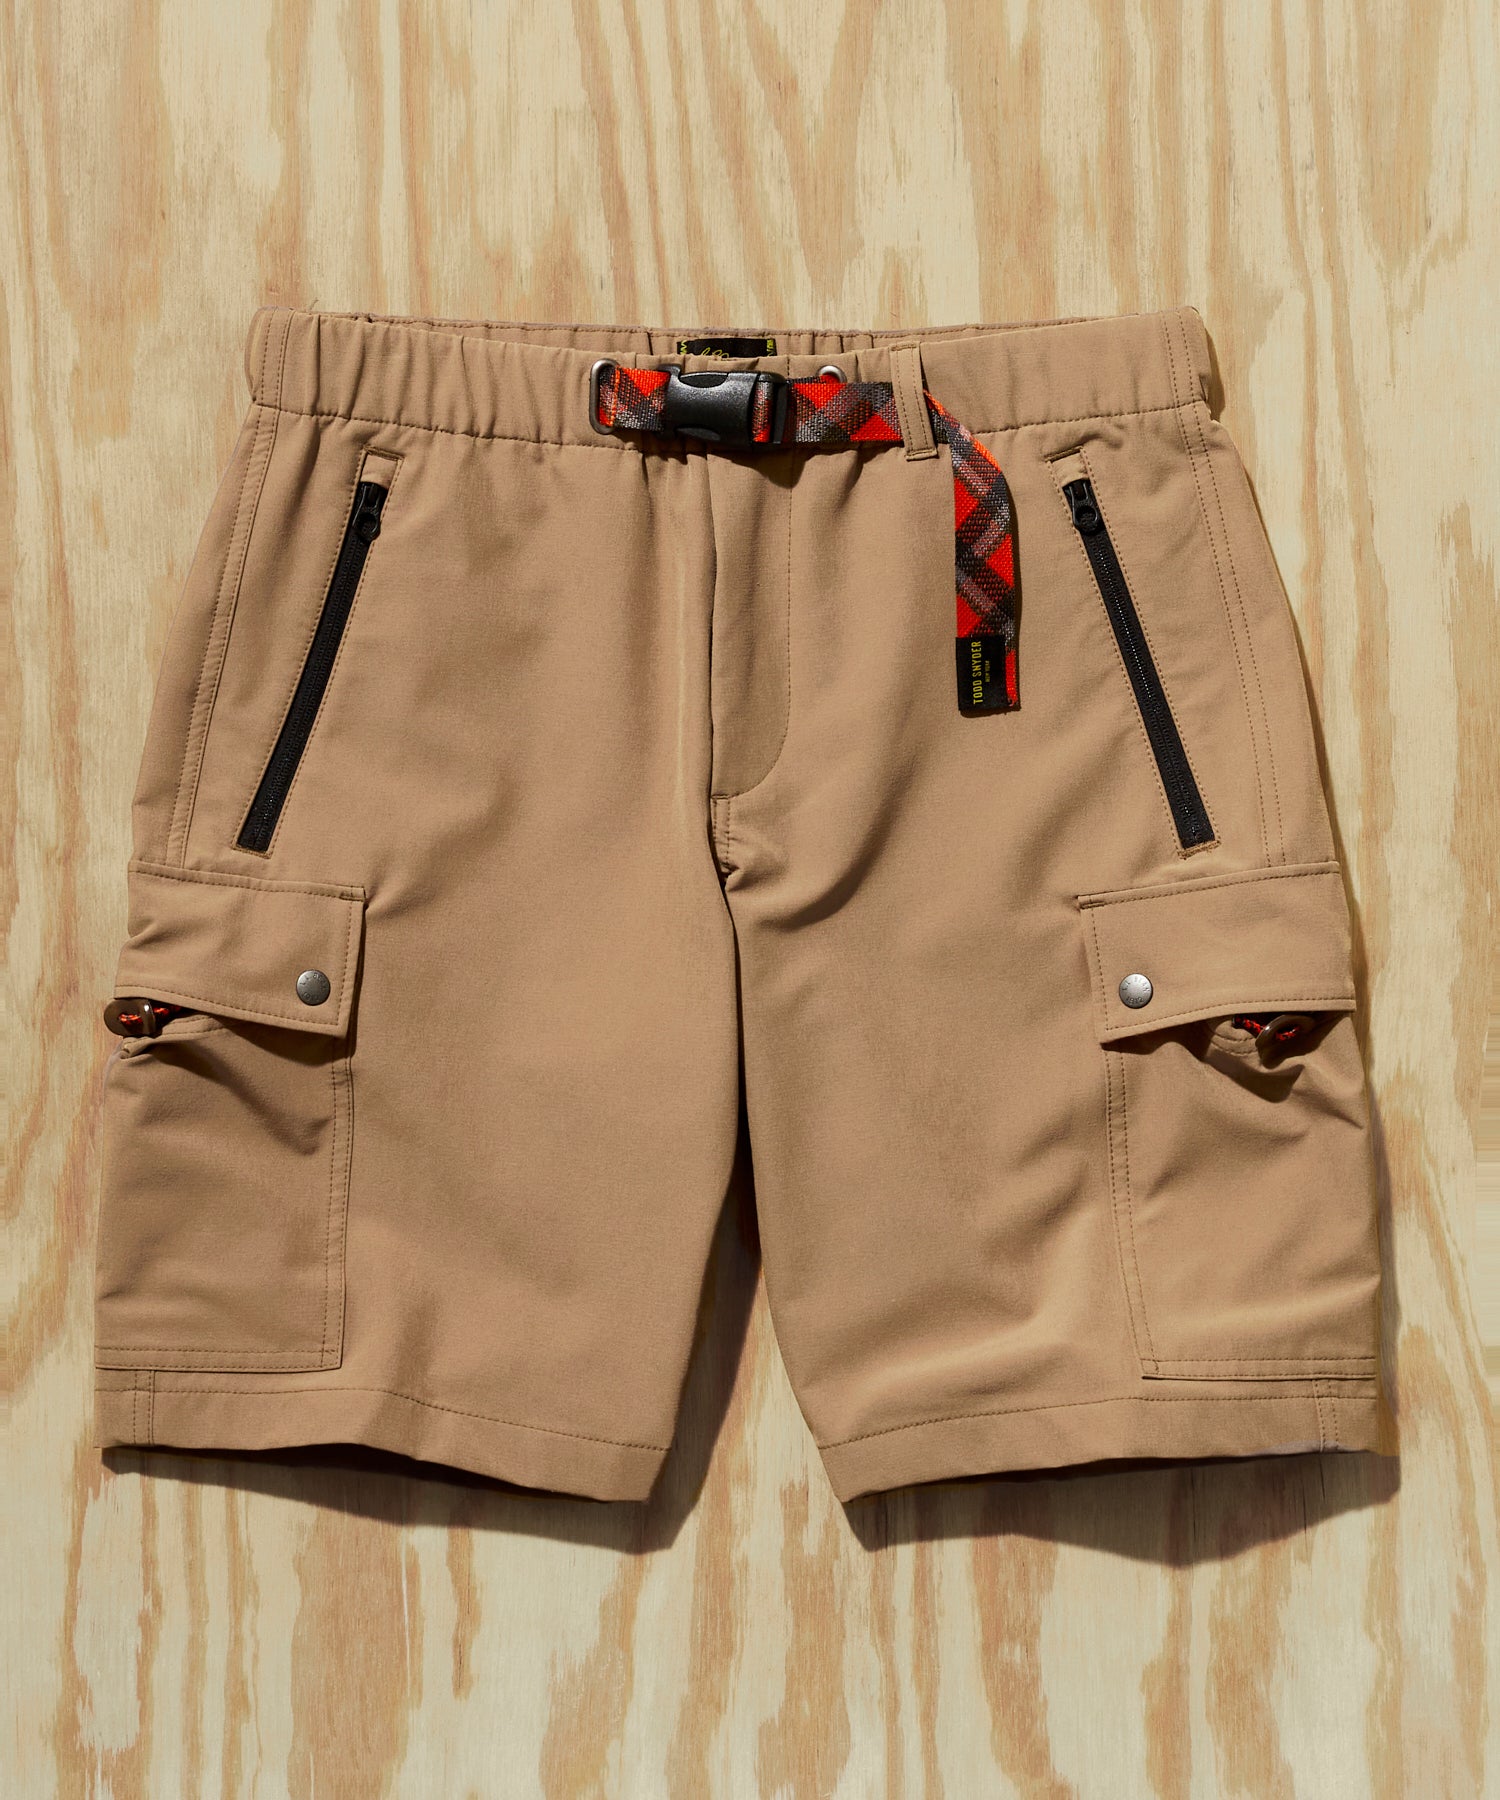 L.L.Bean x Todd Snyder Climbing Short in Dune Brown